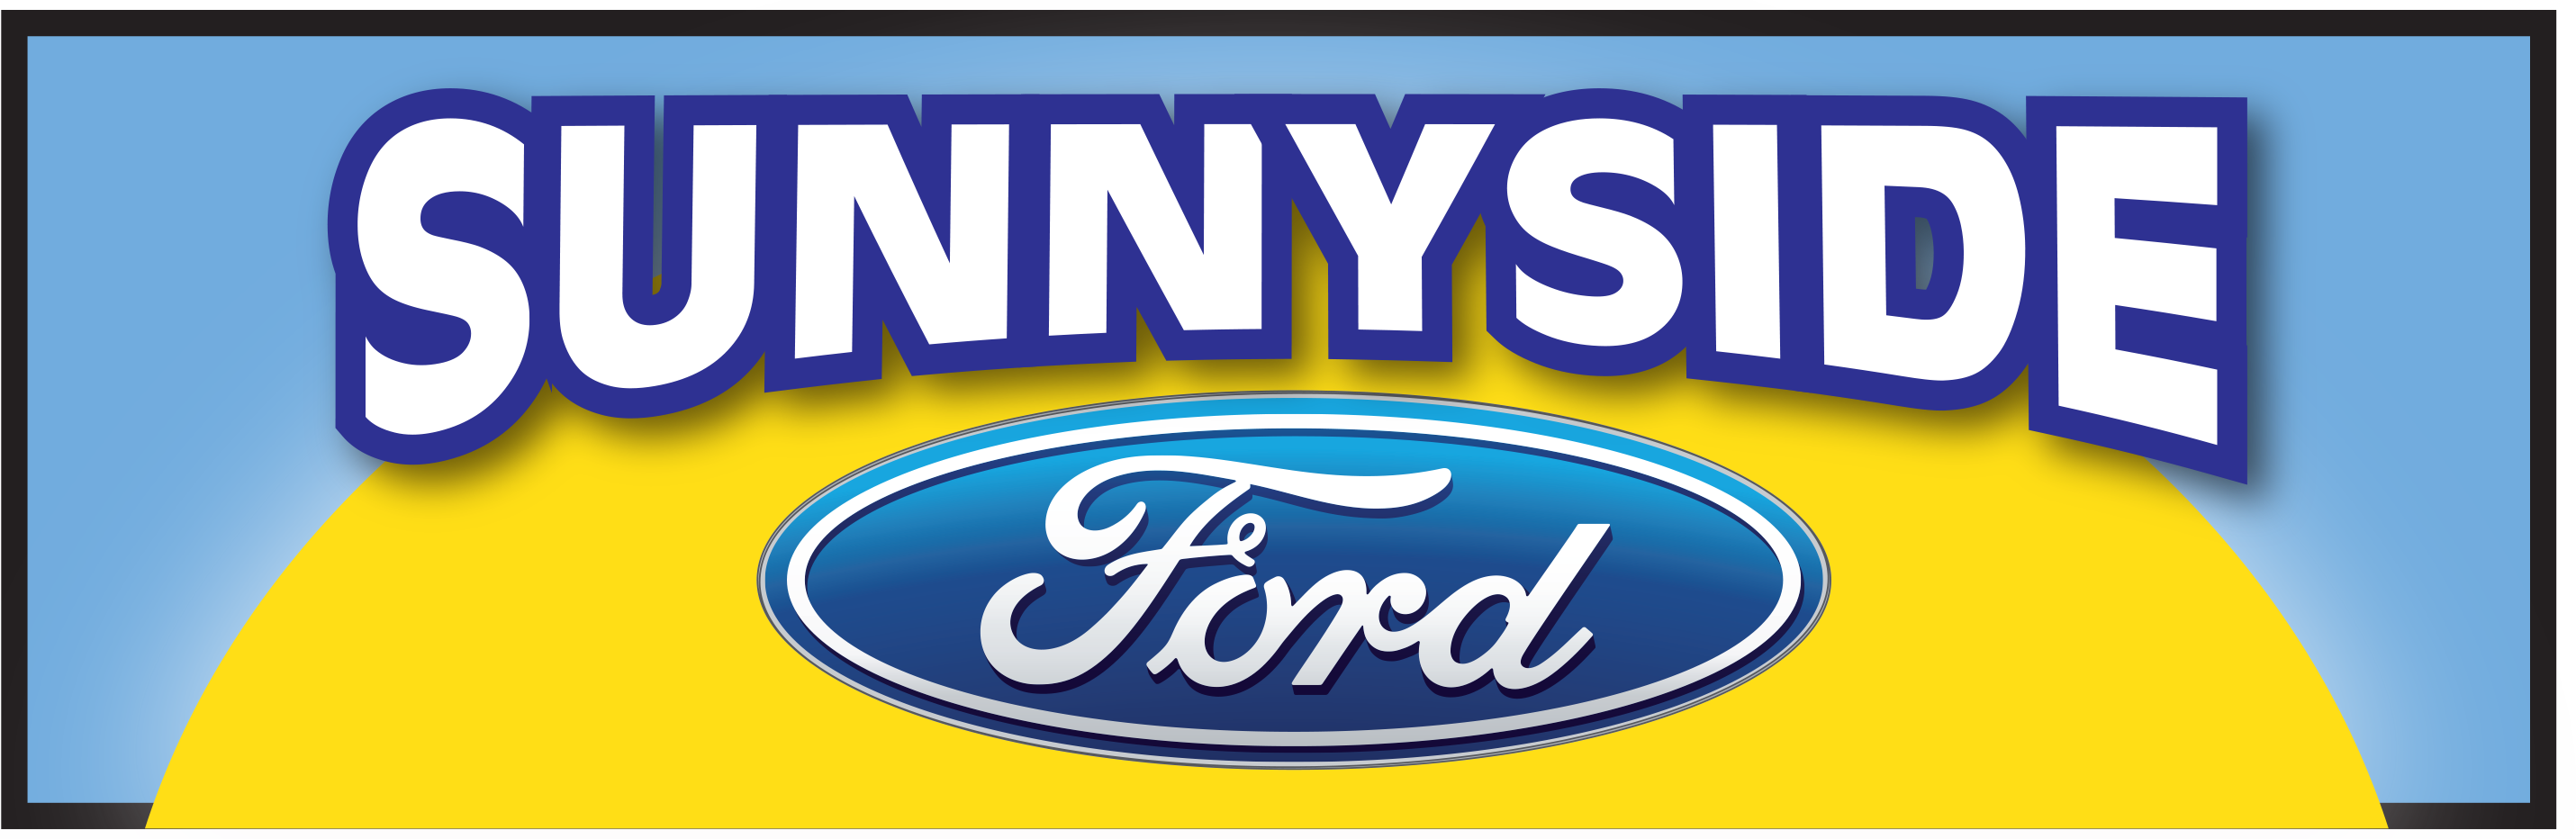 Sunny Side Ford